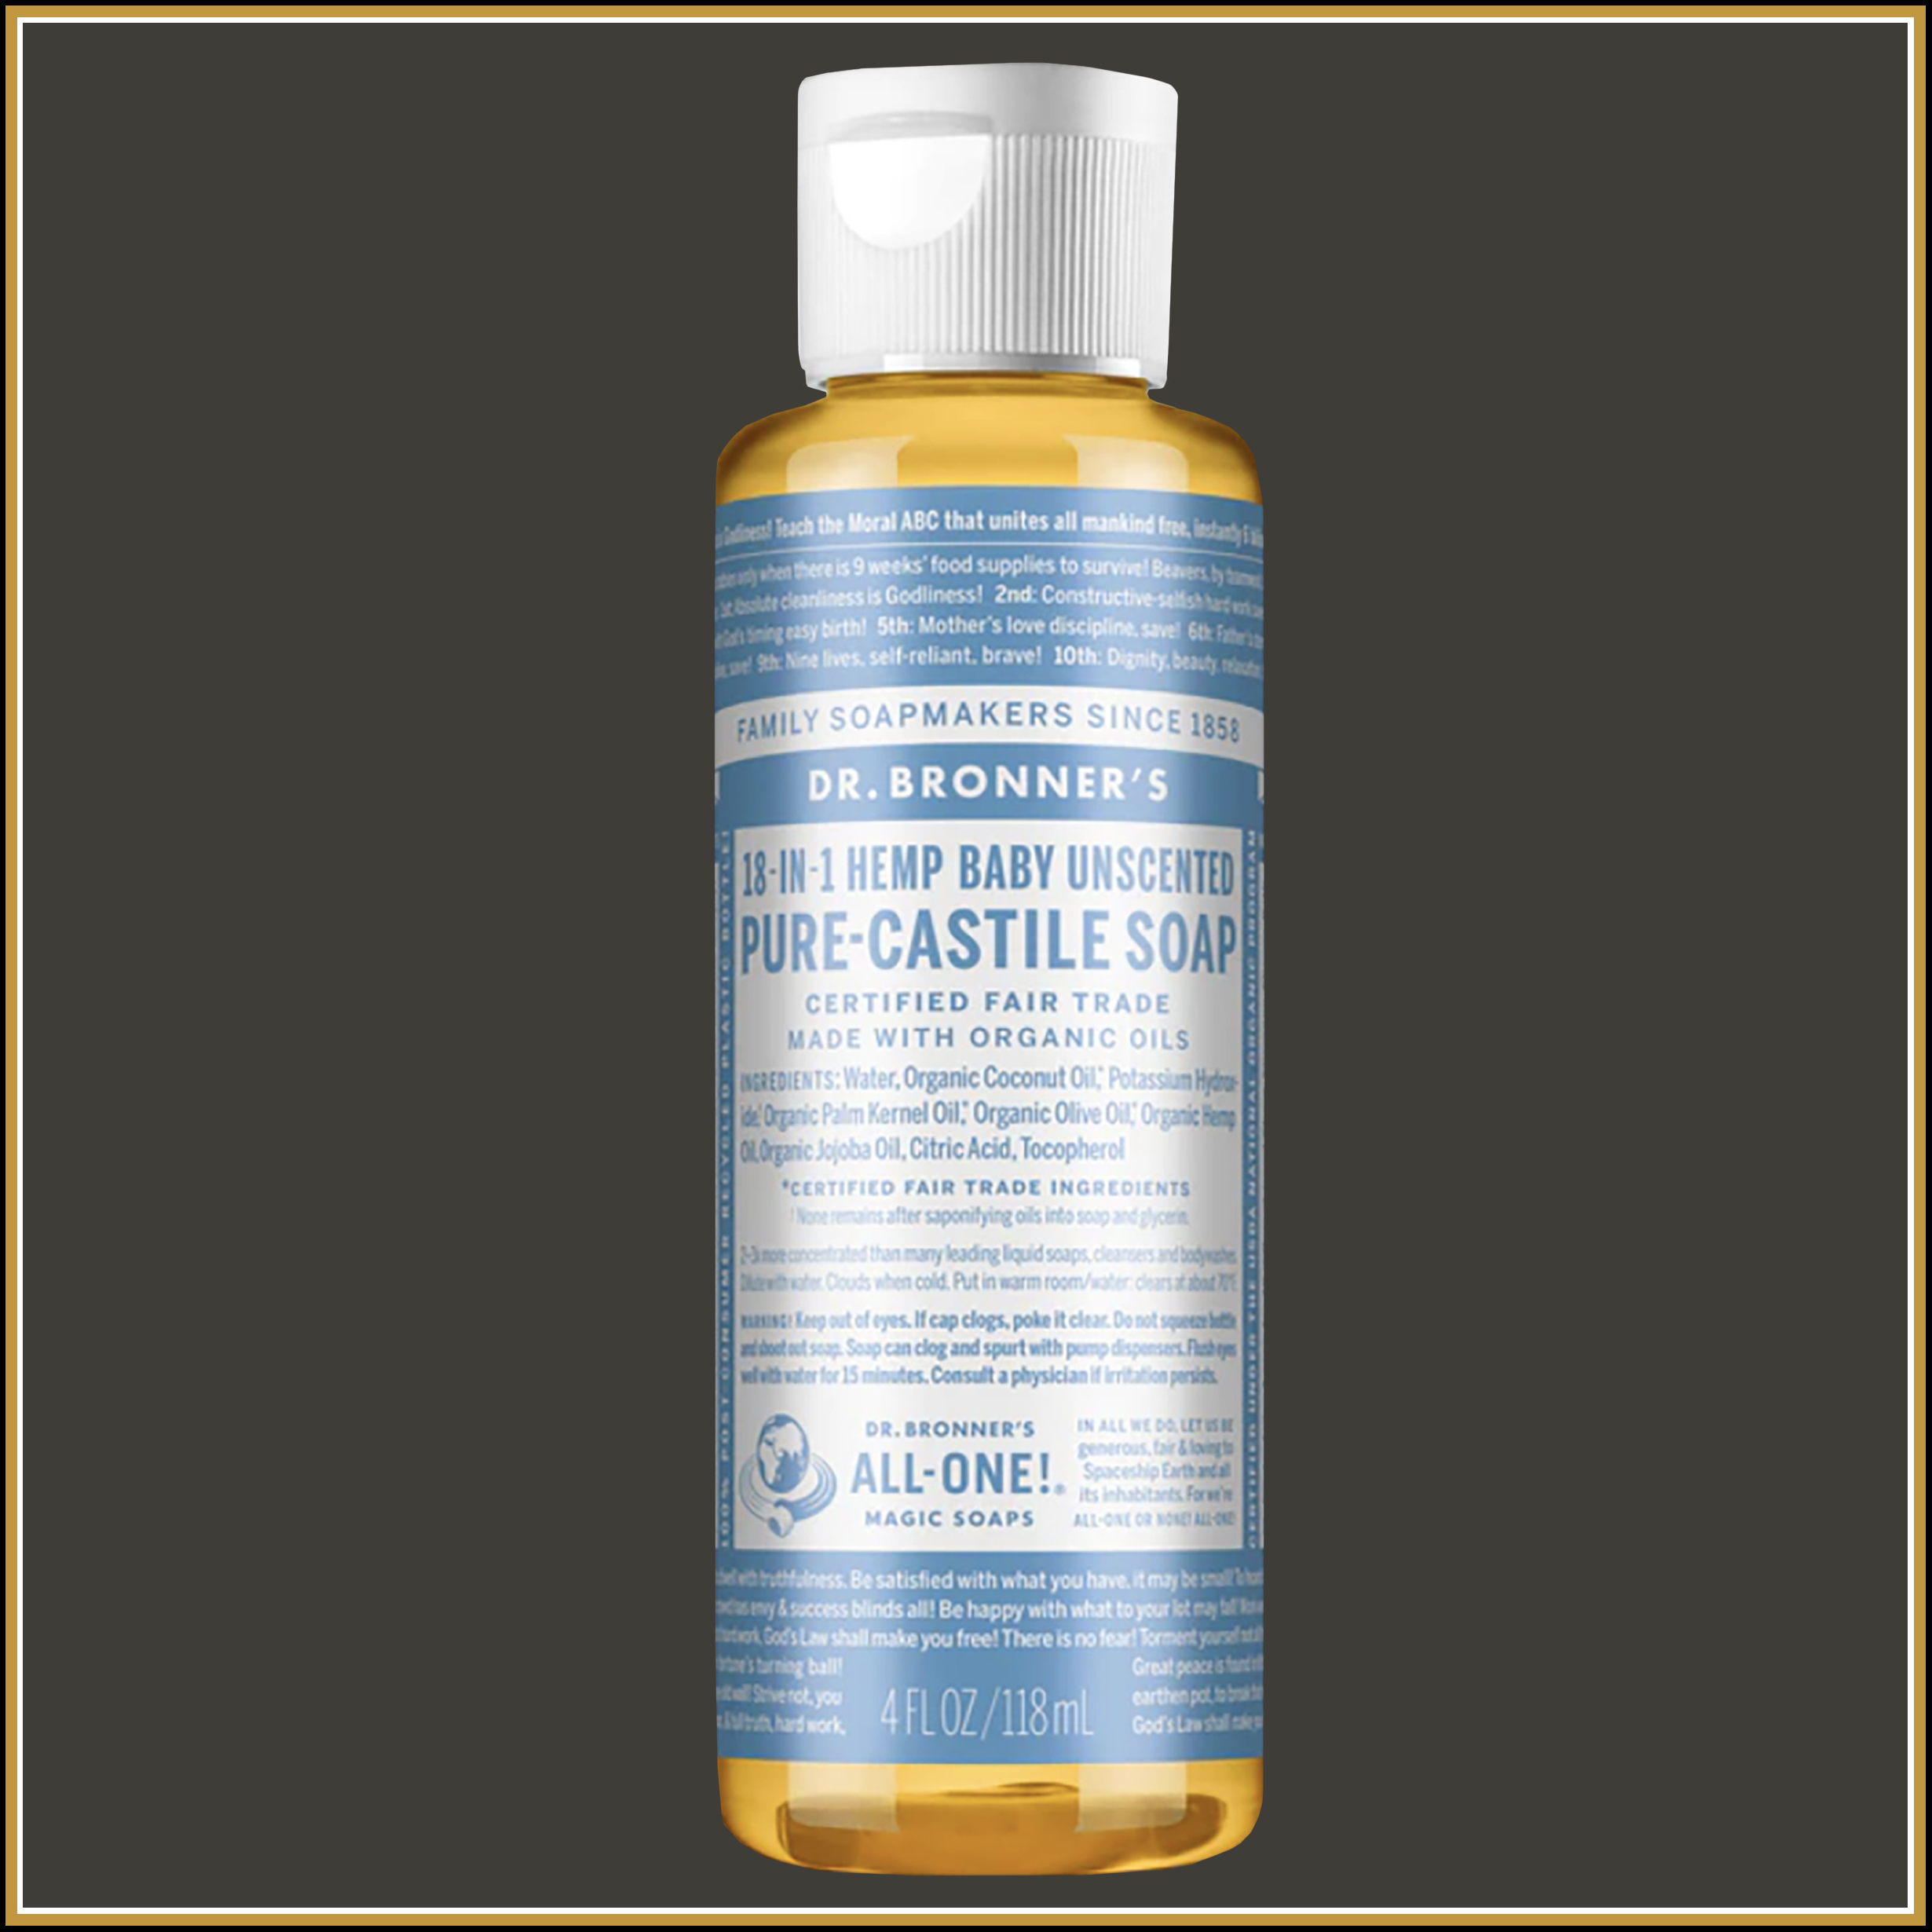 $8.00: Dr. Bronner's Pure-Castile Liquid Soap, Baby Unscented, 4 ounce. - 